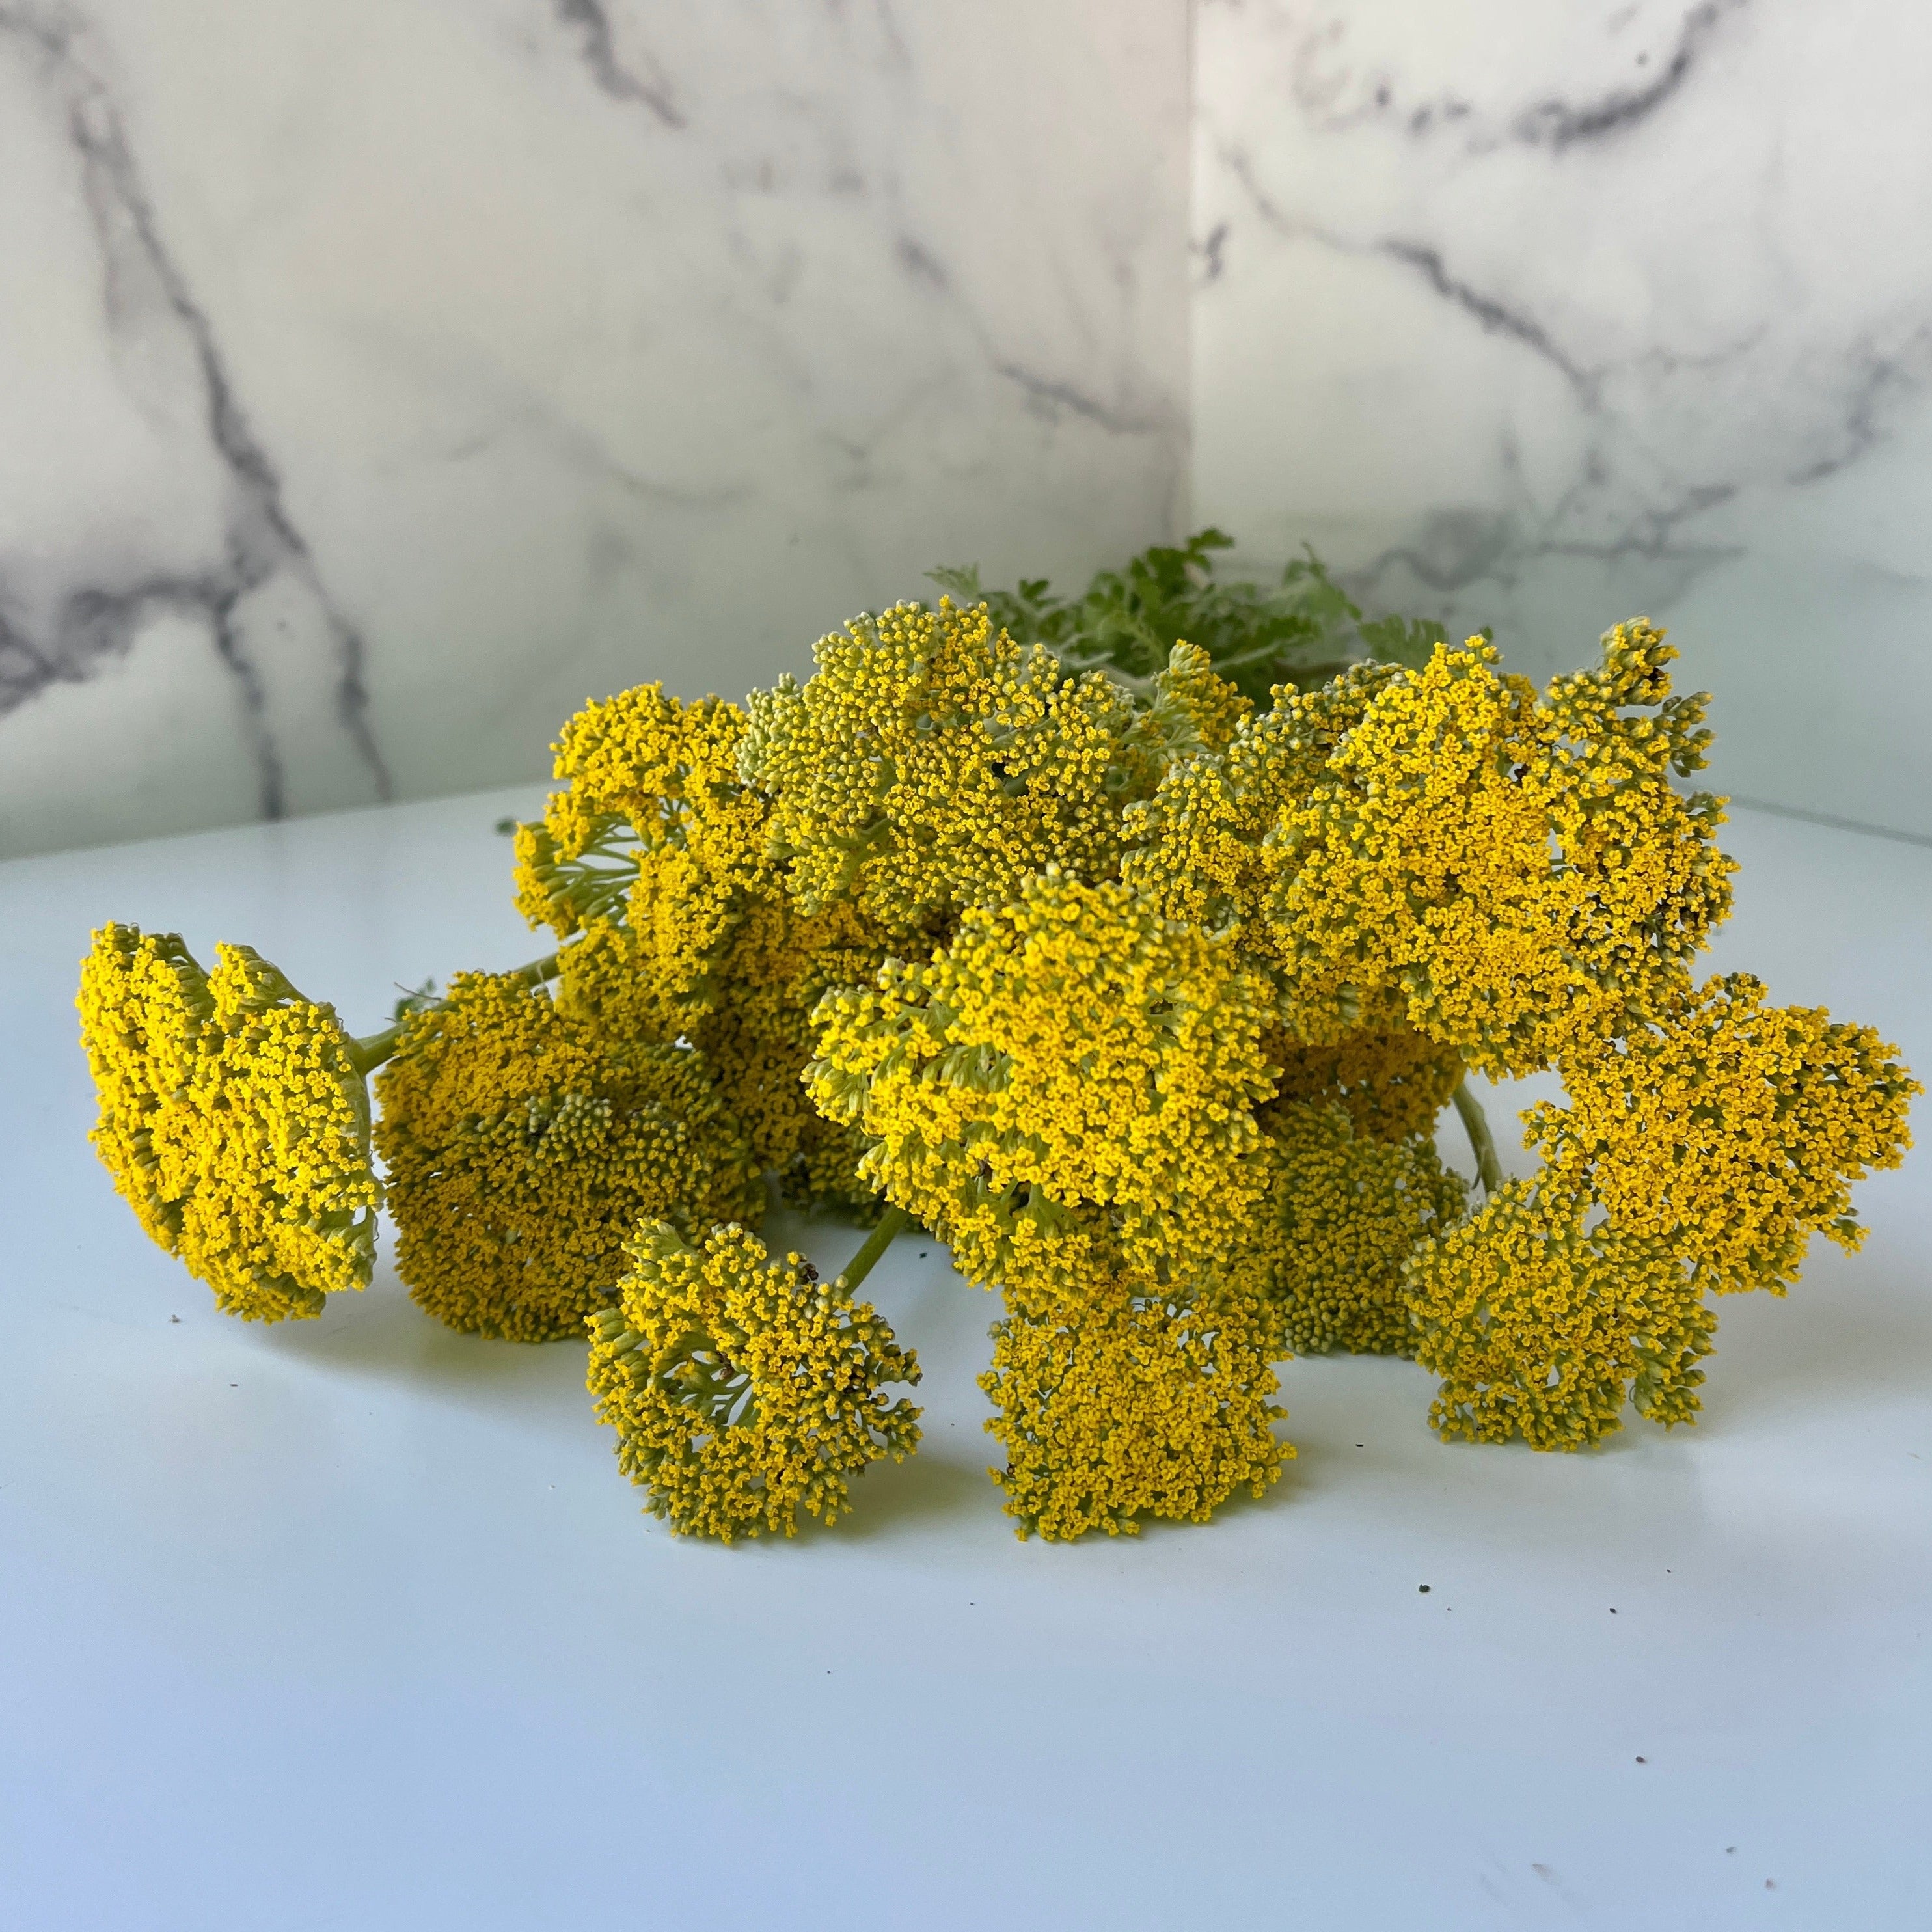 Yarrow-Gold - great for drying too!